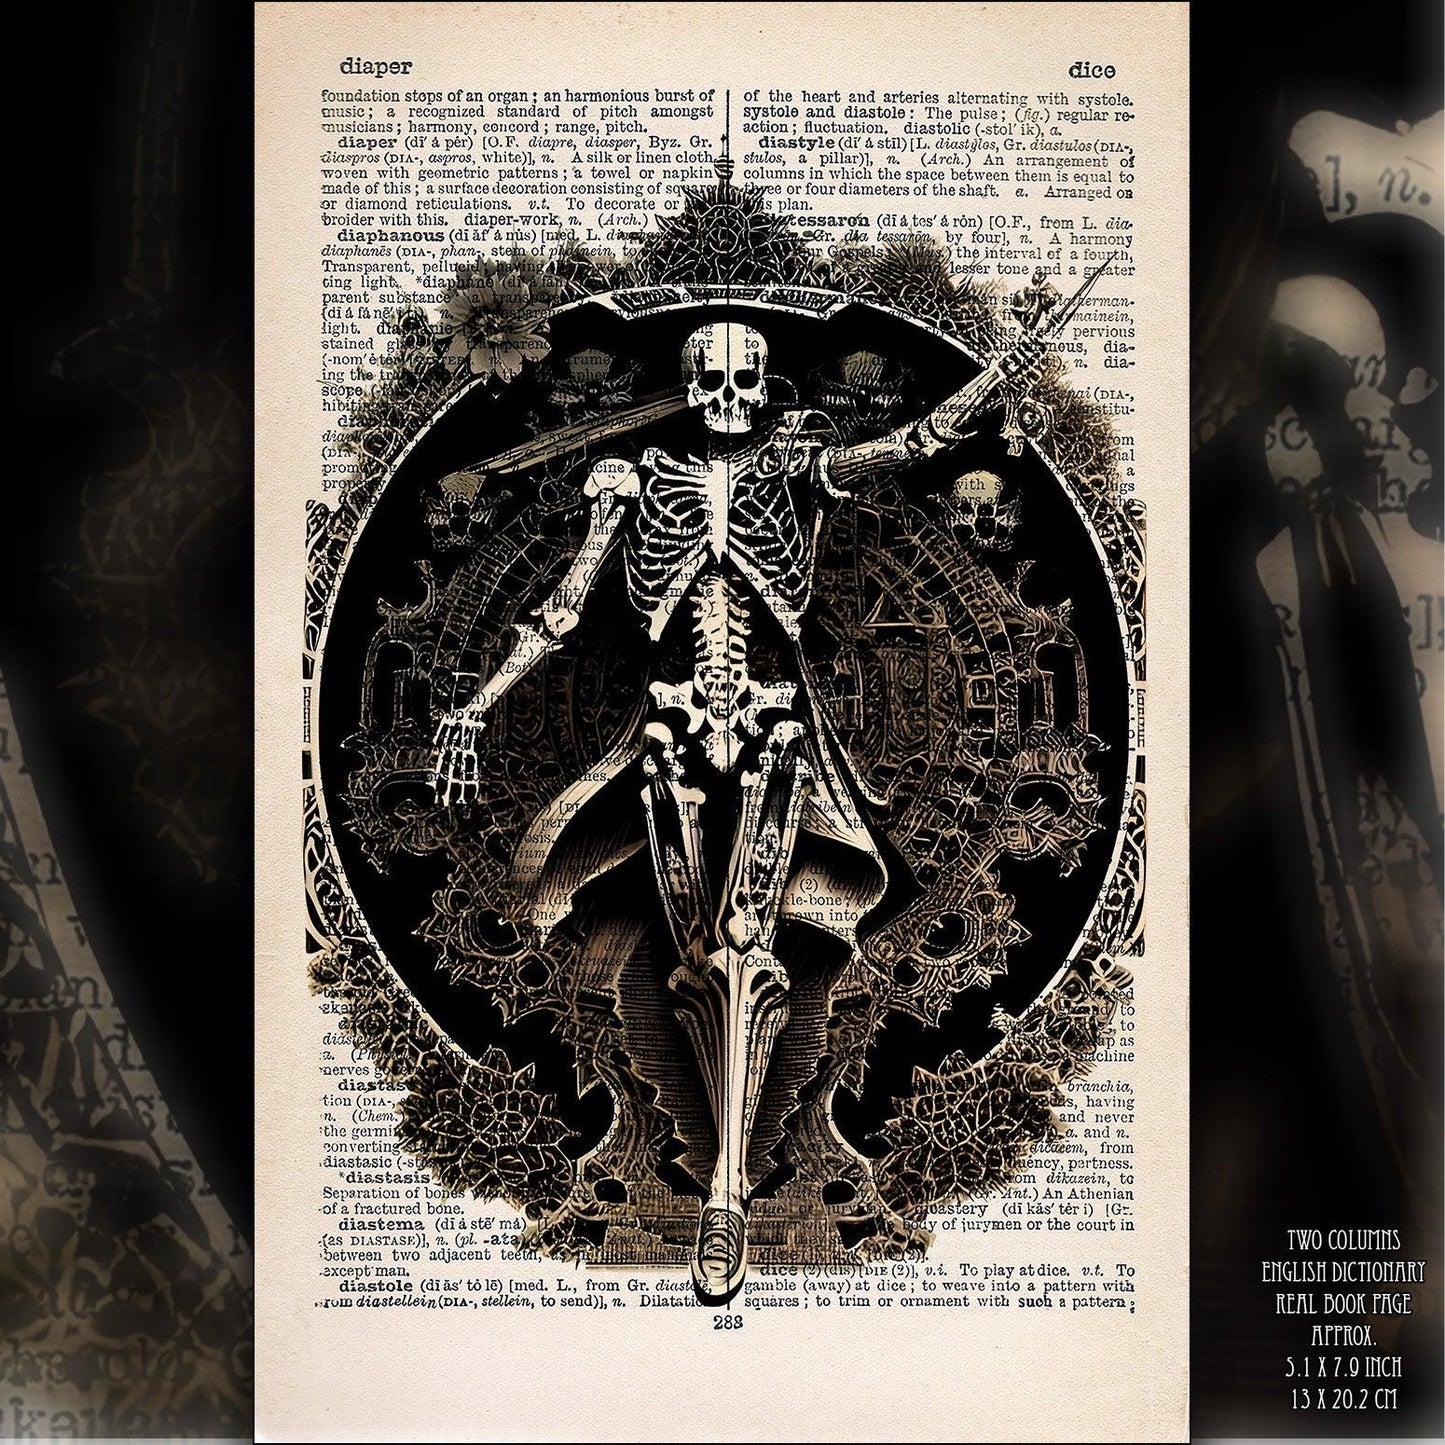 Gothic Boho Home Decor: Vintage Victorian Wall Dictionary Art with Macabre Skull and Dark Aesthetic - ArtCursor